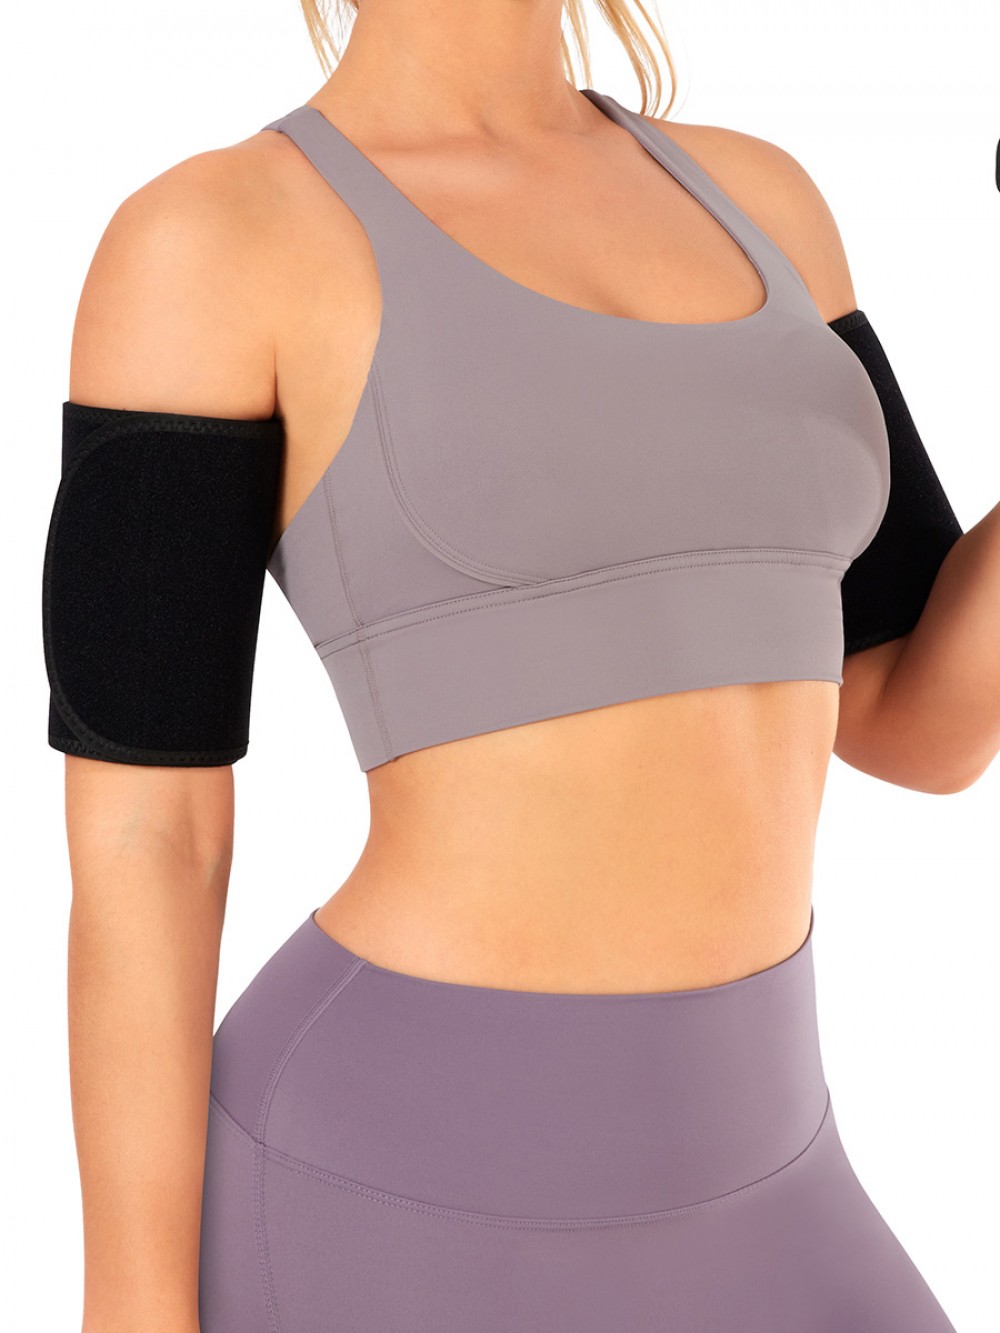 New Design 2 Piece/Pair Fitness Arm Slimming Trimmer Shaper